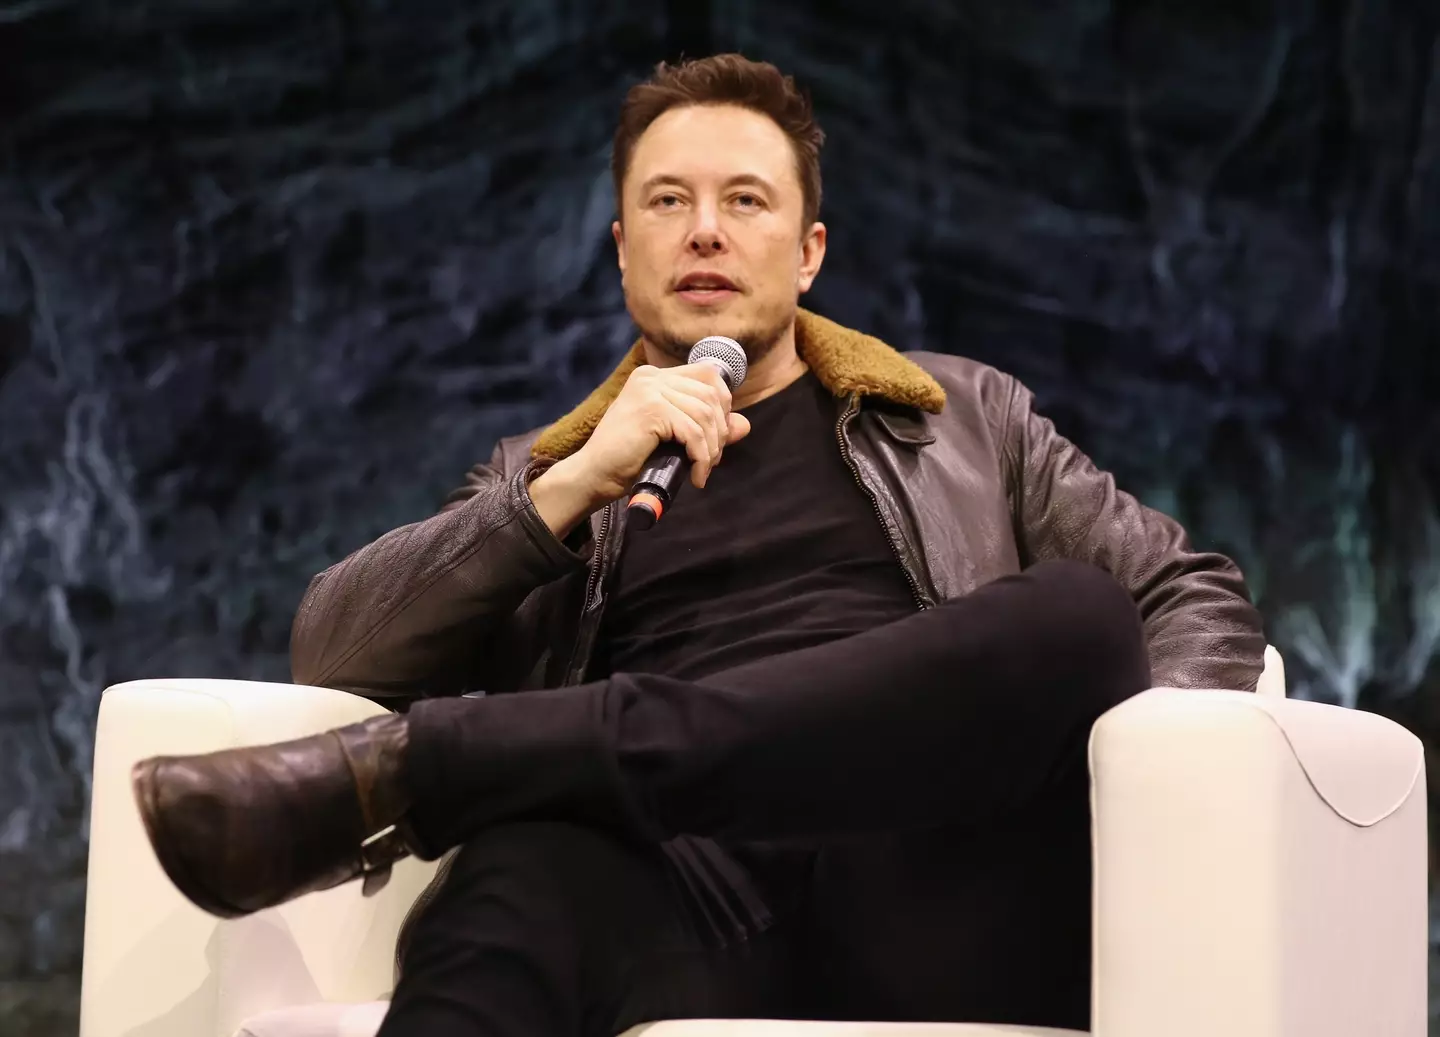 Elon Musk has confirmed the location of the fight and where fans can stream it.